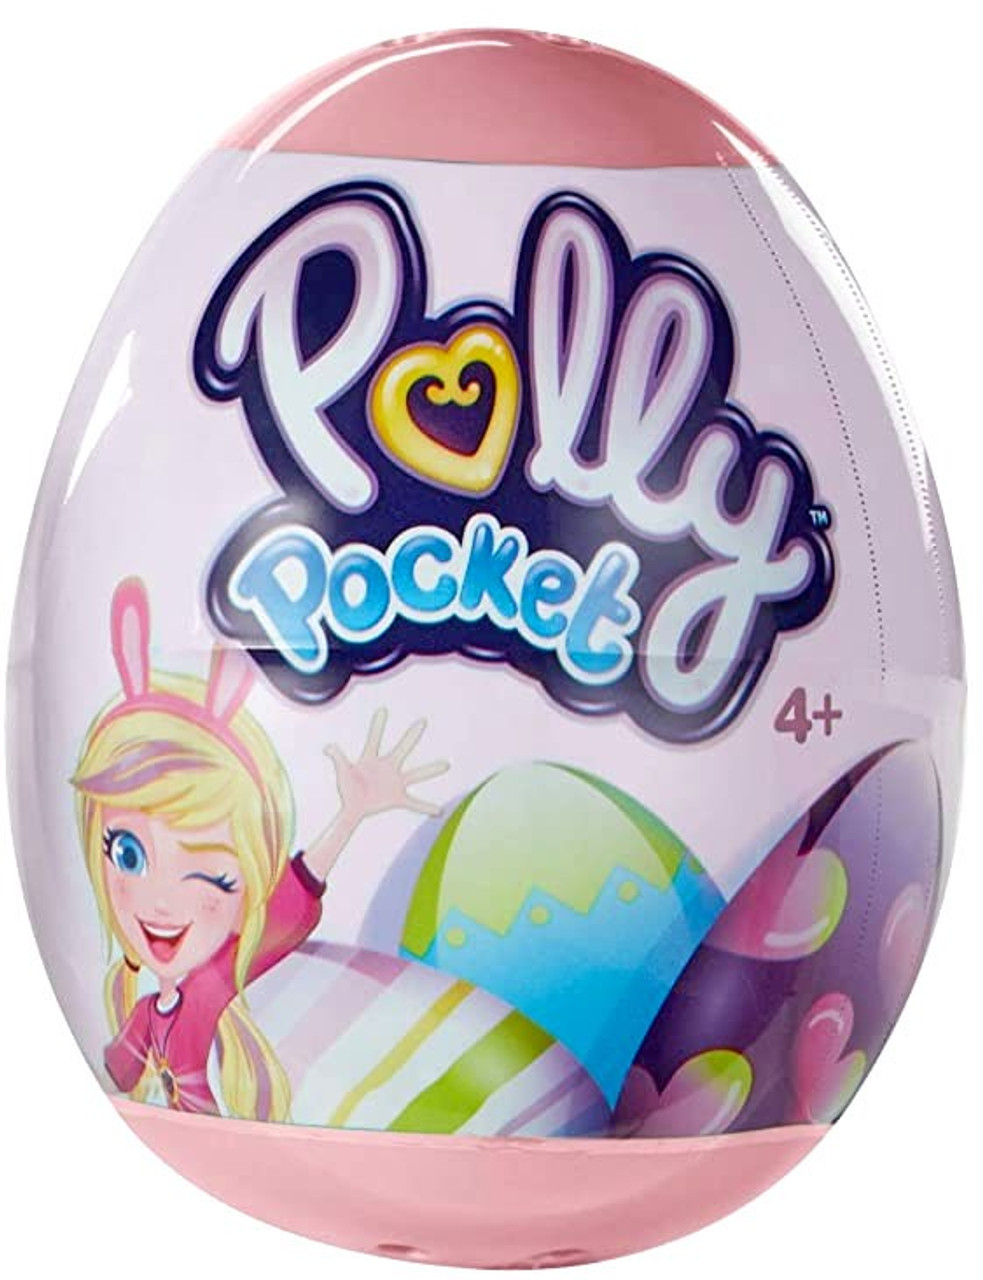 Polly Pocket Easter Egg Mystery Pack 1 Random Mini Polly Doll Mattel Toys Toywiz - found this easter egg in the please upgrade me letter roblox